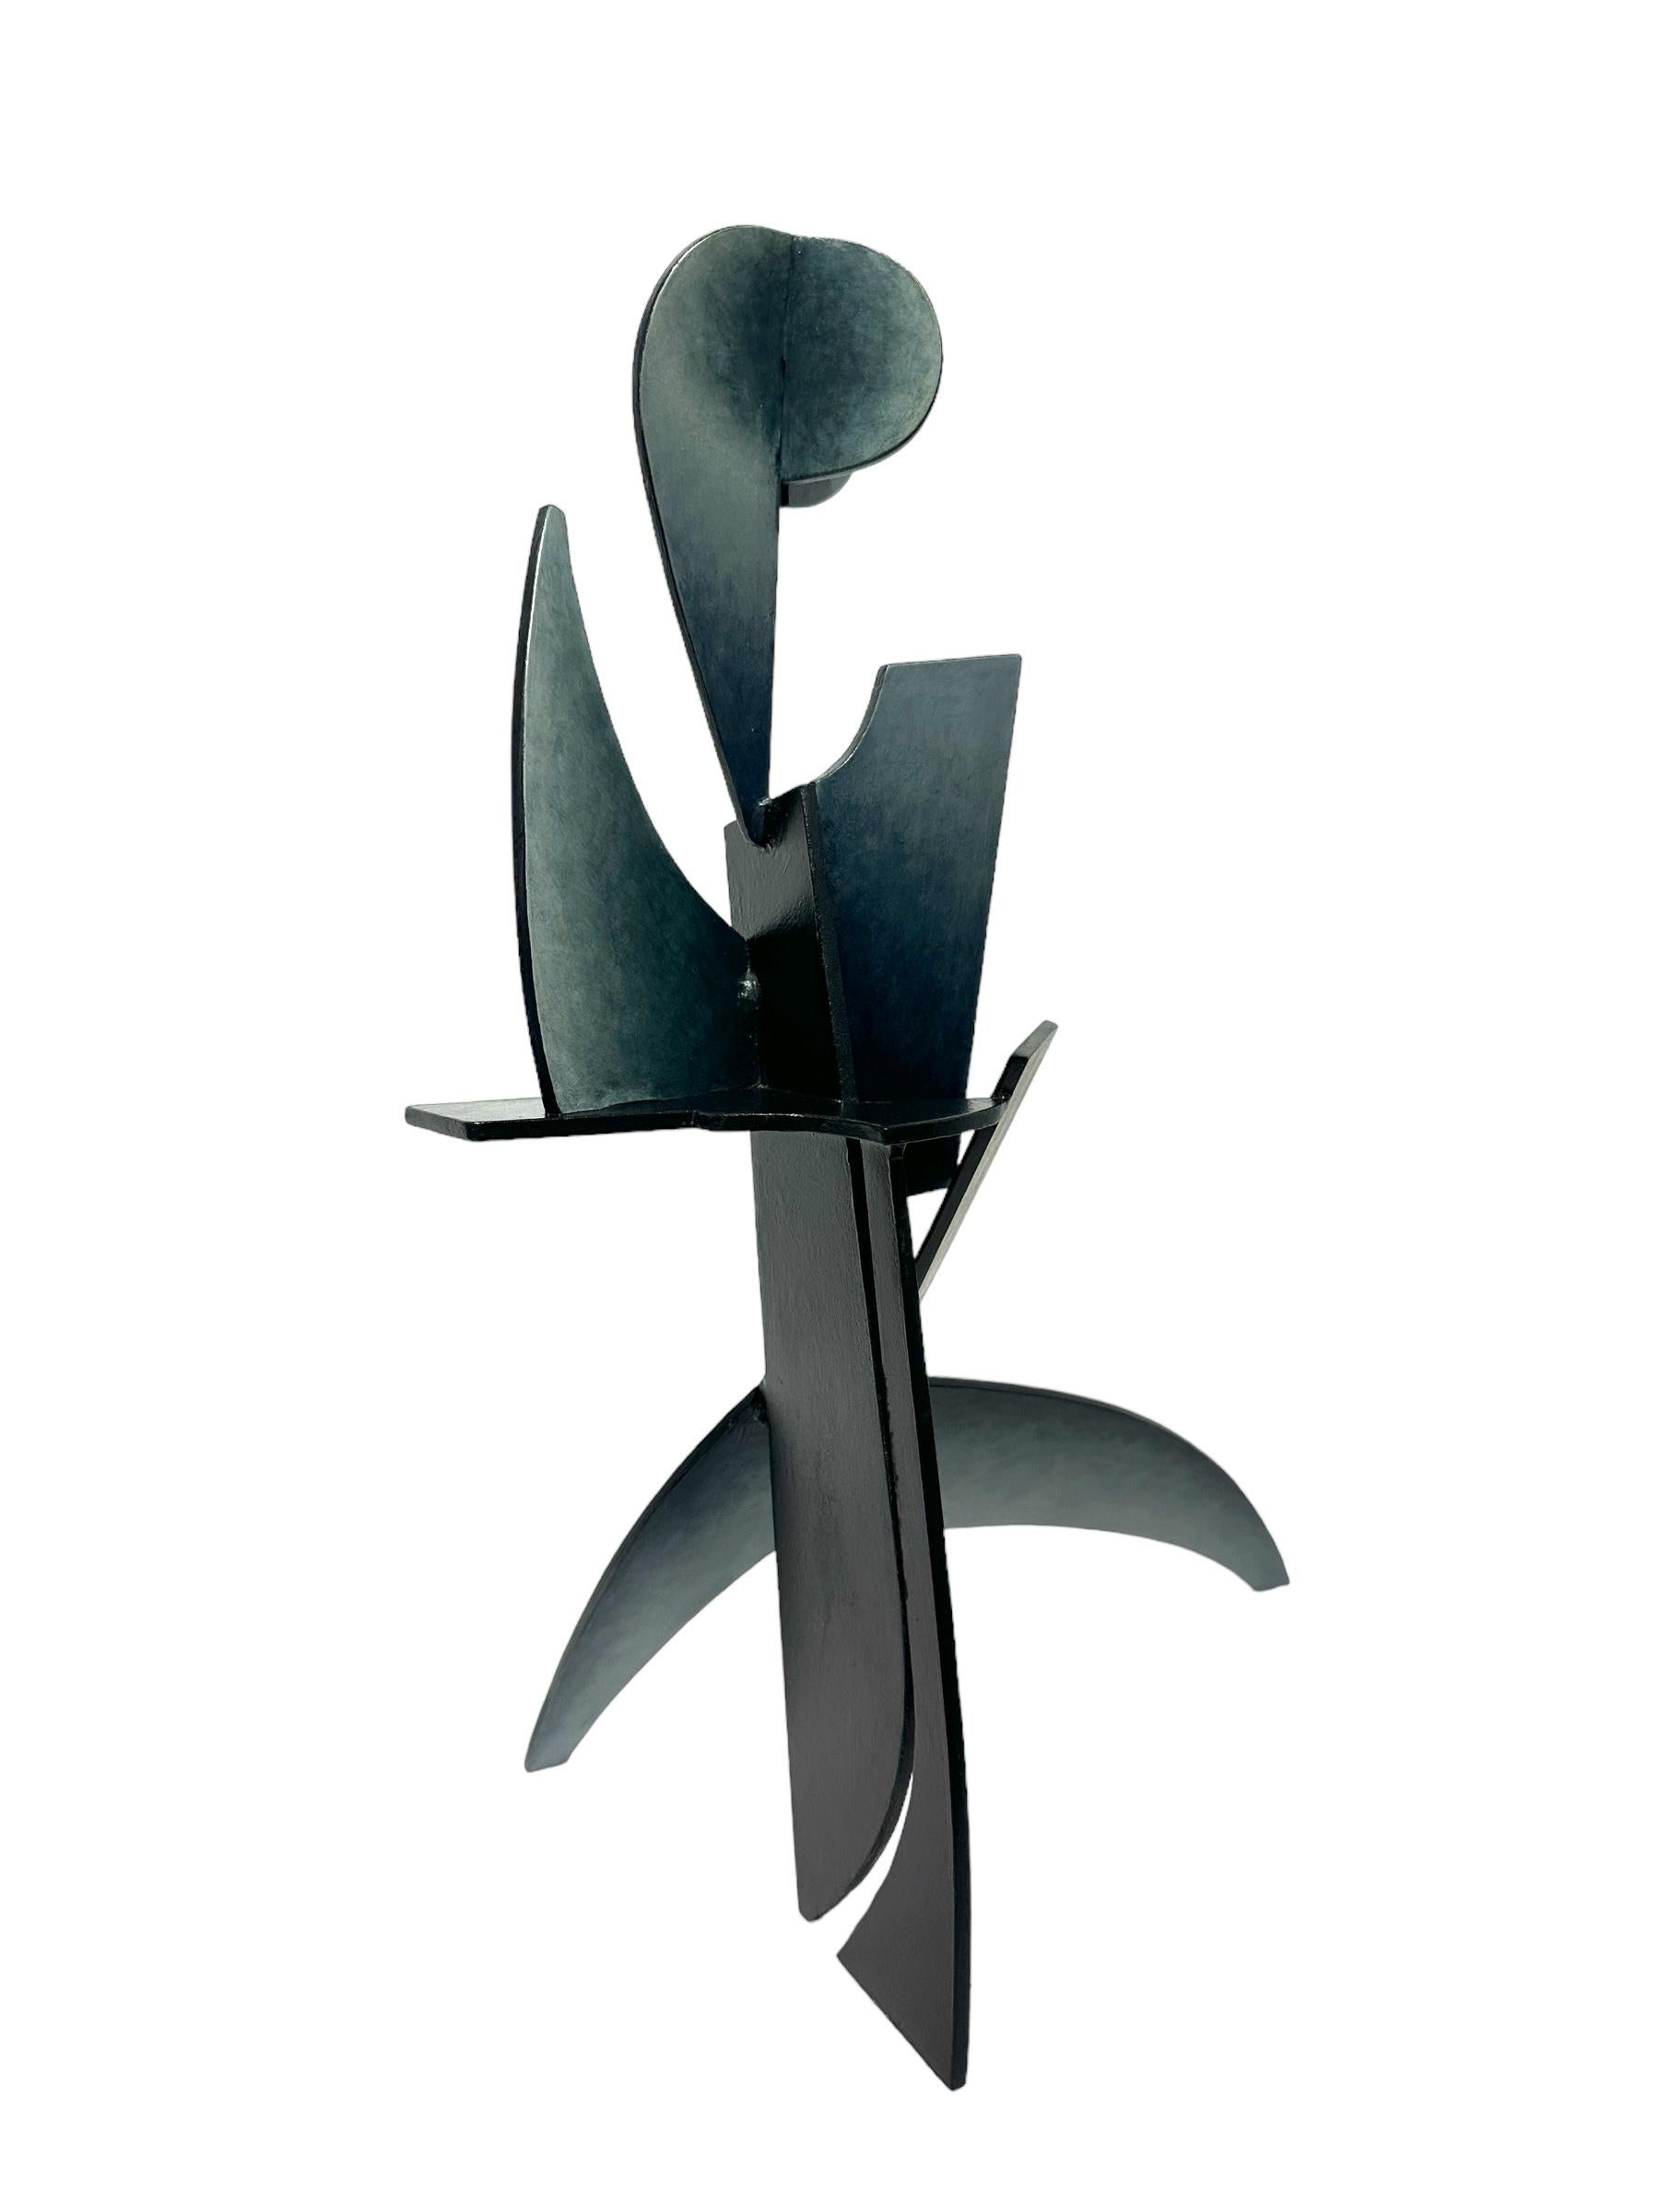 Spirit - Abstract Geometric Form, Hand Painted, Welded Steel Sculpture  For Sale 3